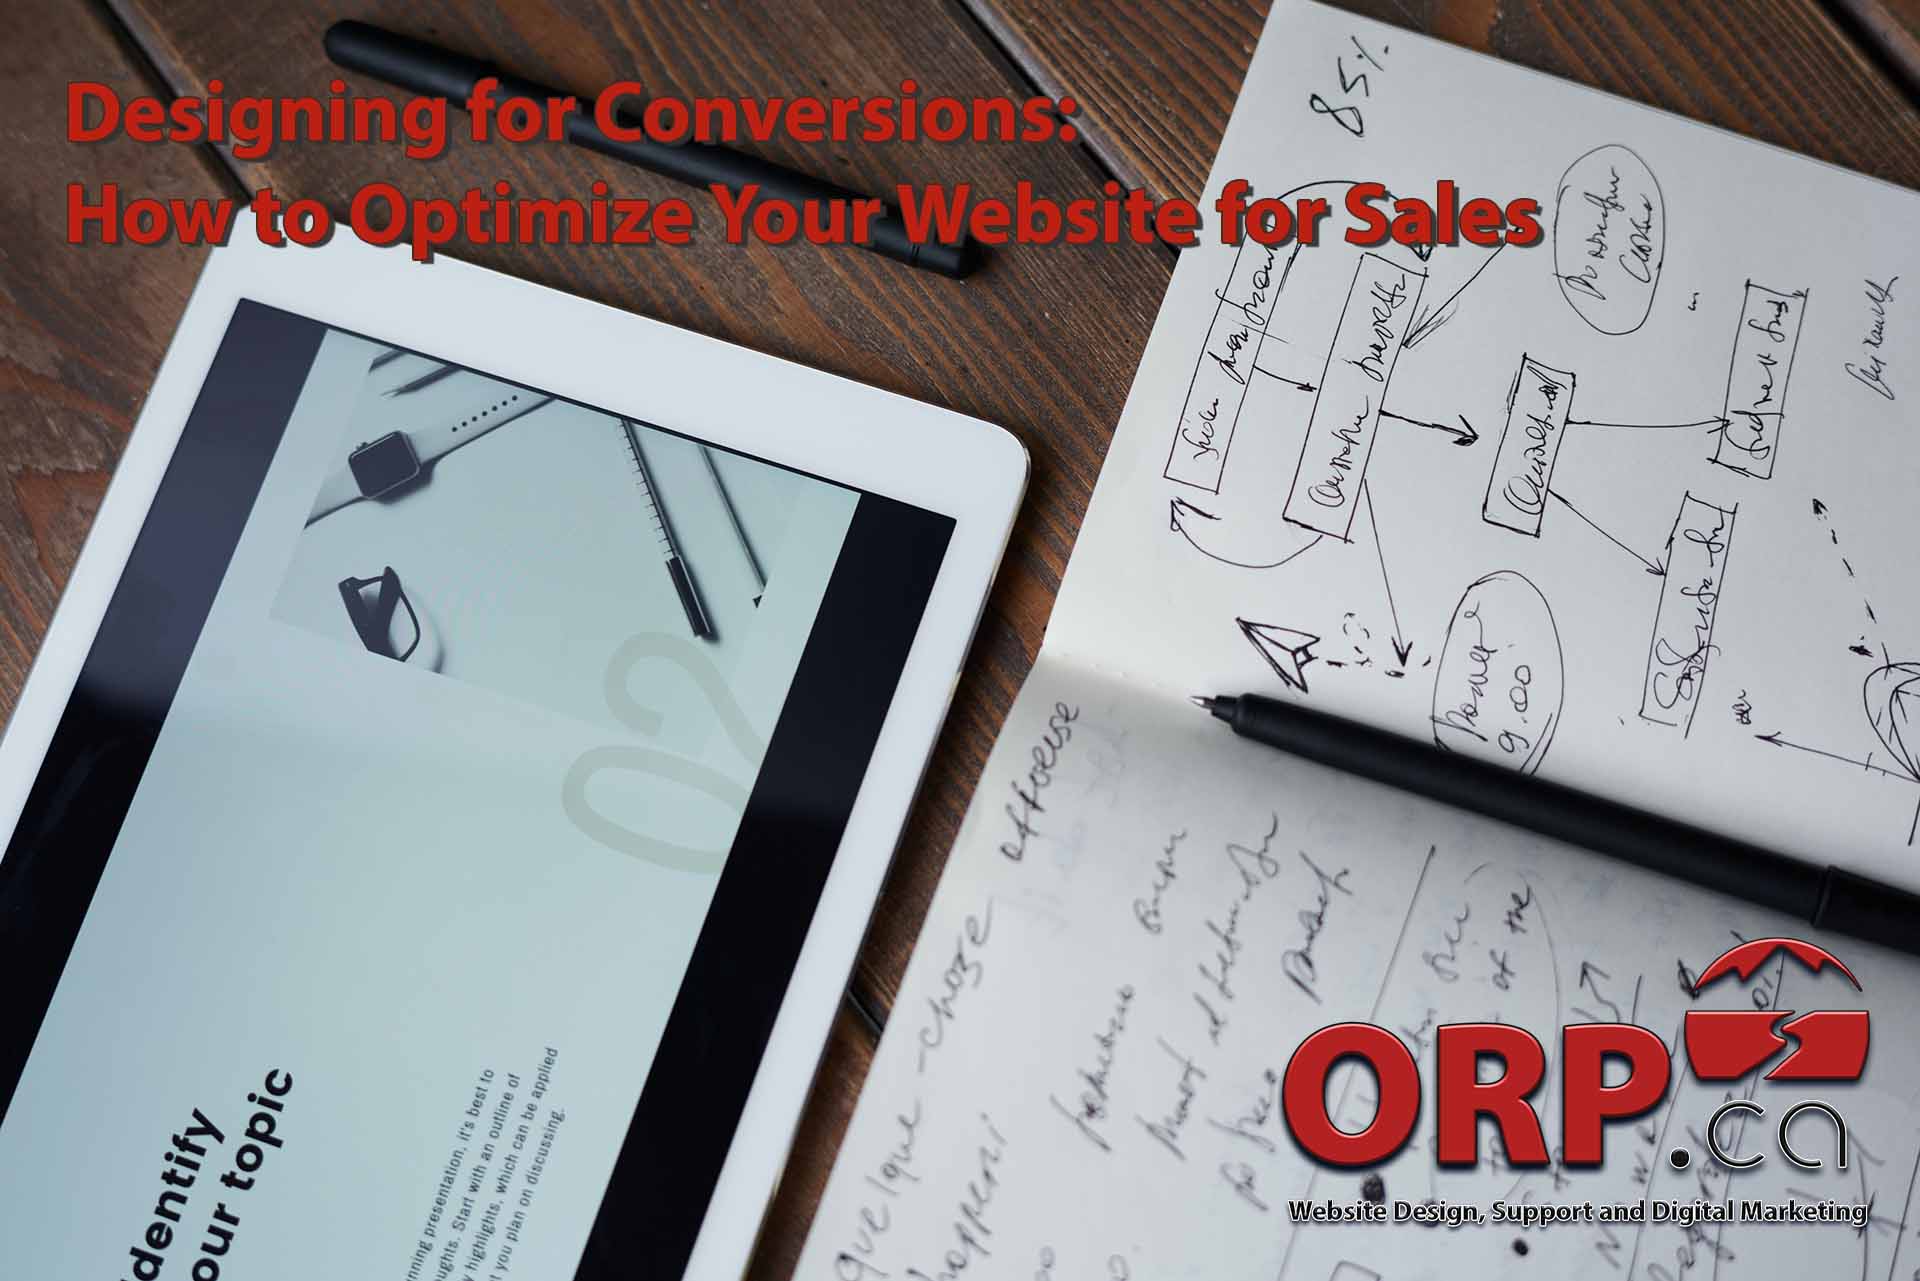 Designing for Conversions How to Optimize Your Website for Sales - another useful small business blog article from ORP.ca - your website and digital marketing experts